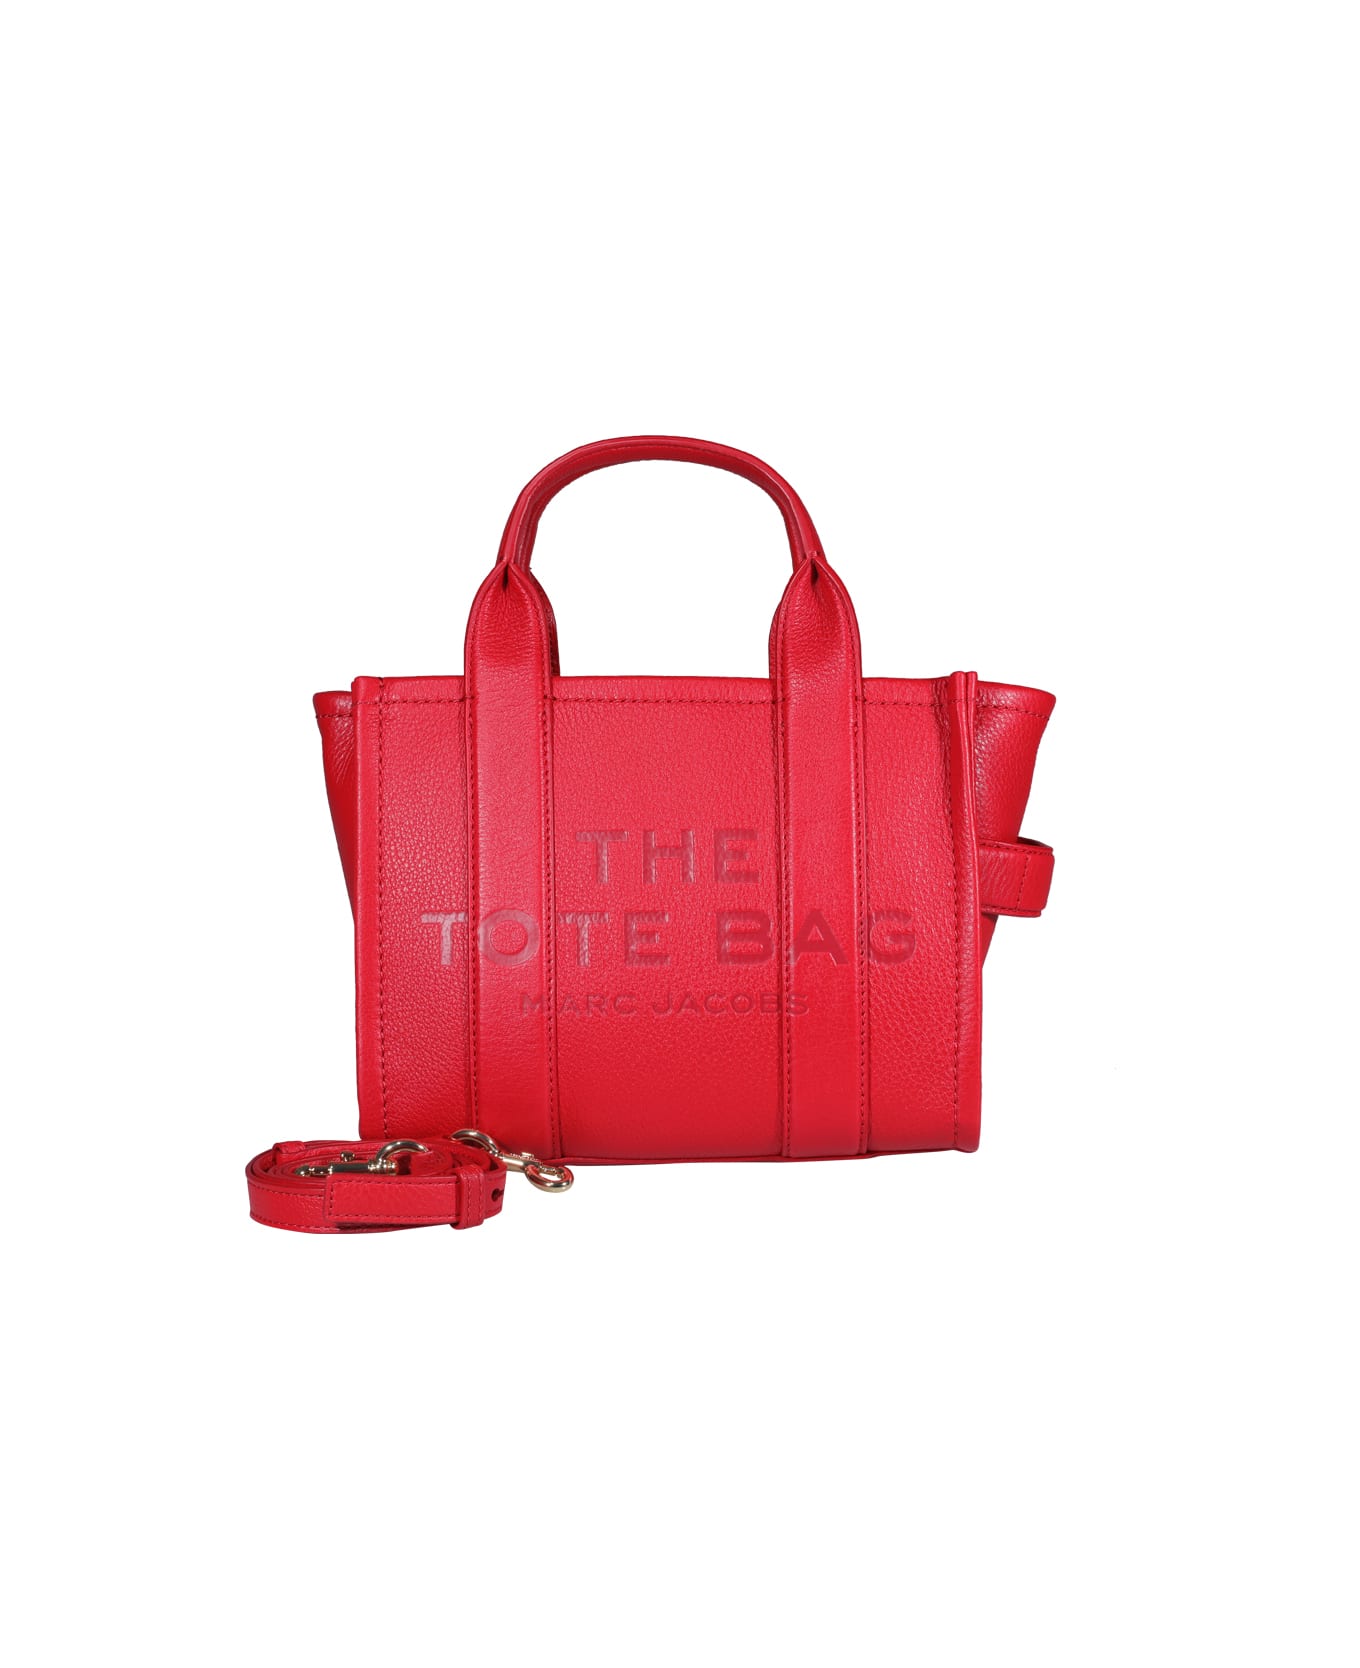 Marc Jacobs The Mini Tote Bag - True red トートバッグ